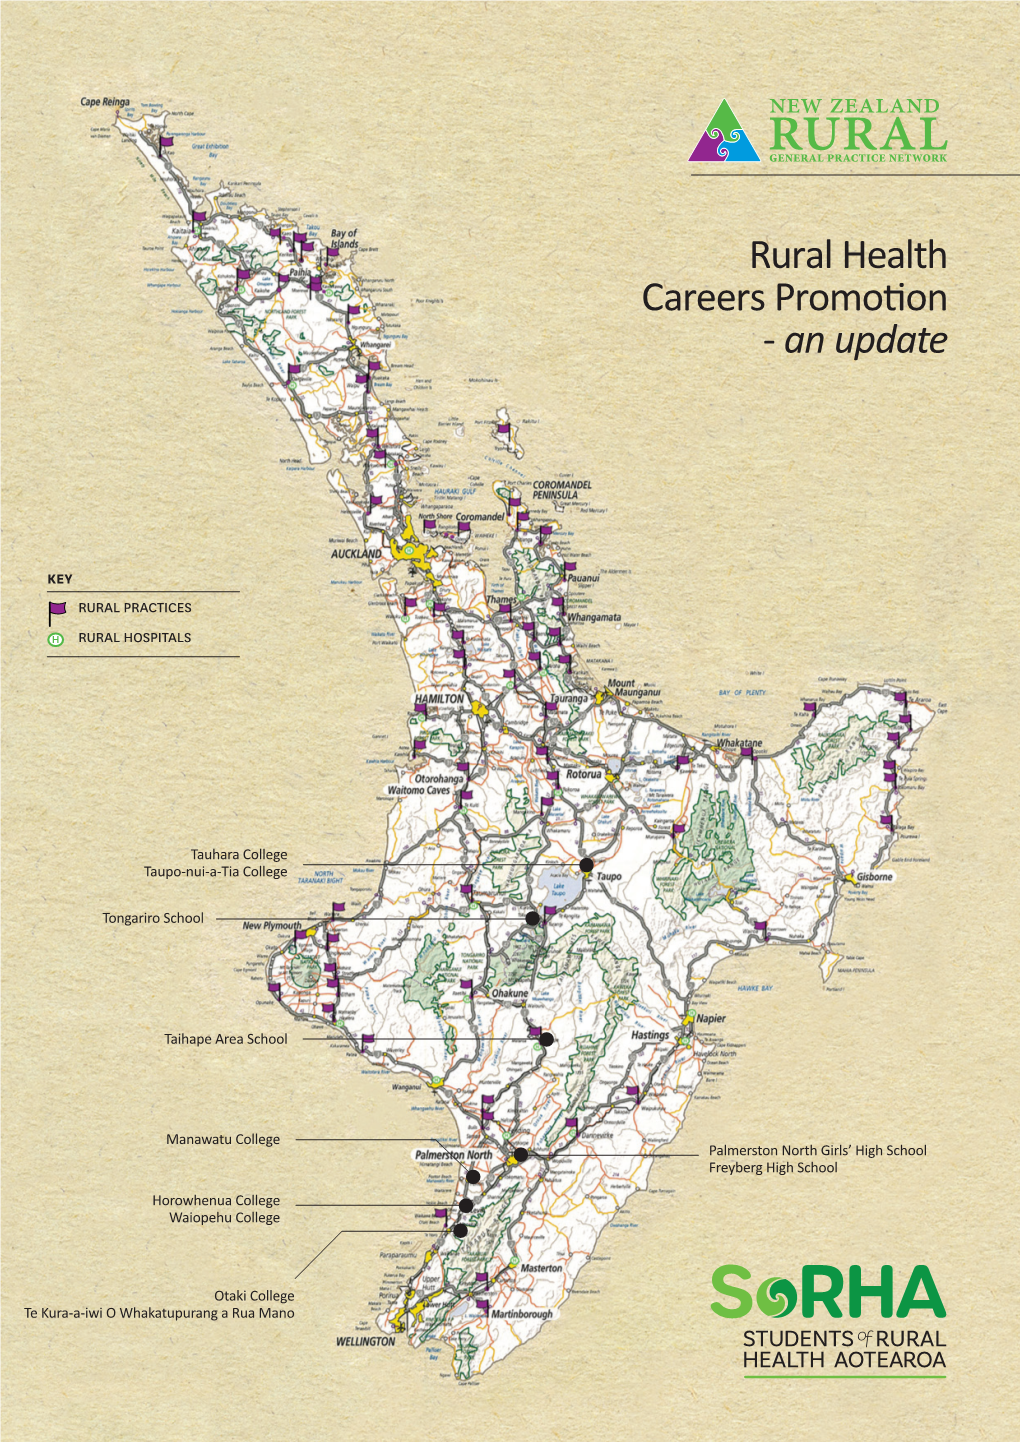 Rural Health Careers Promotion - an Update